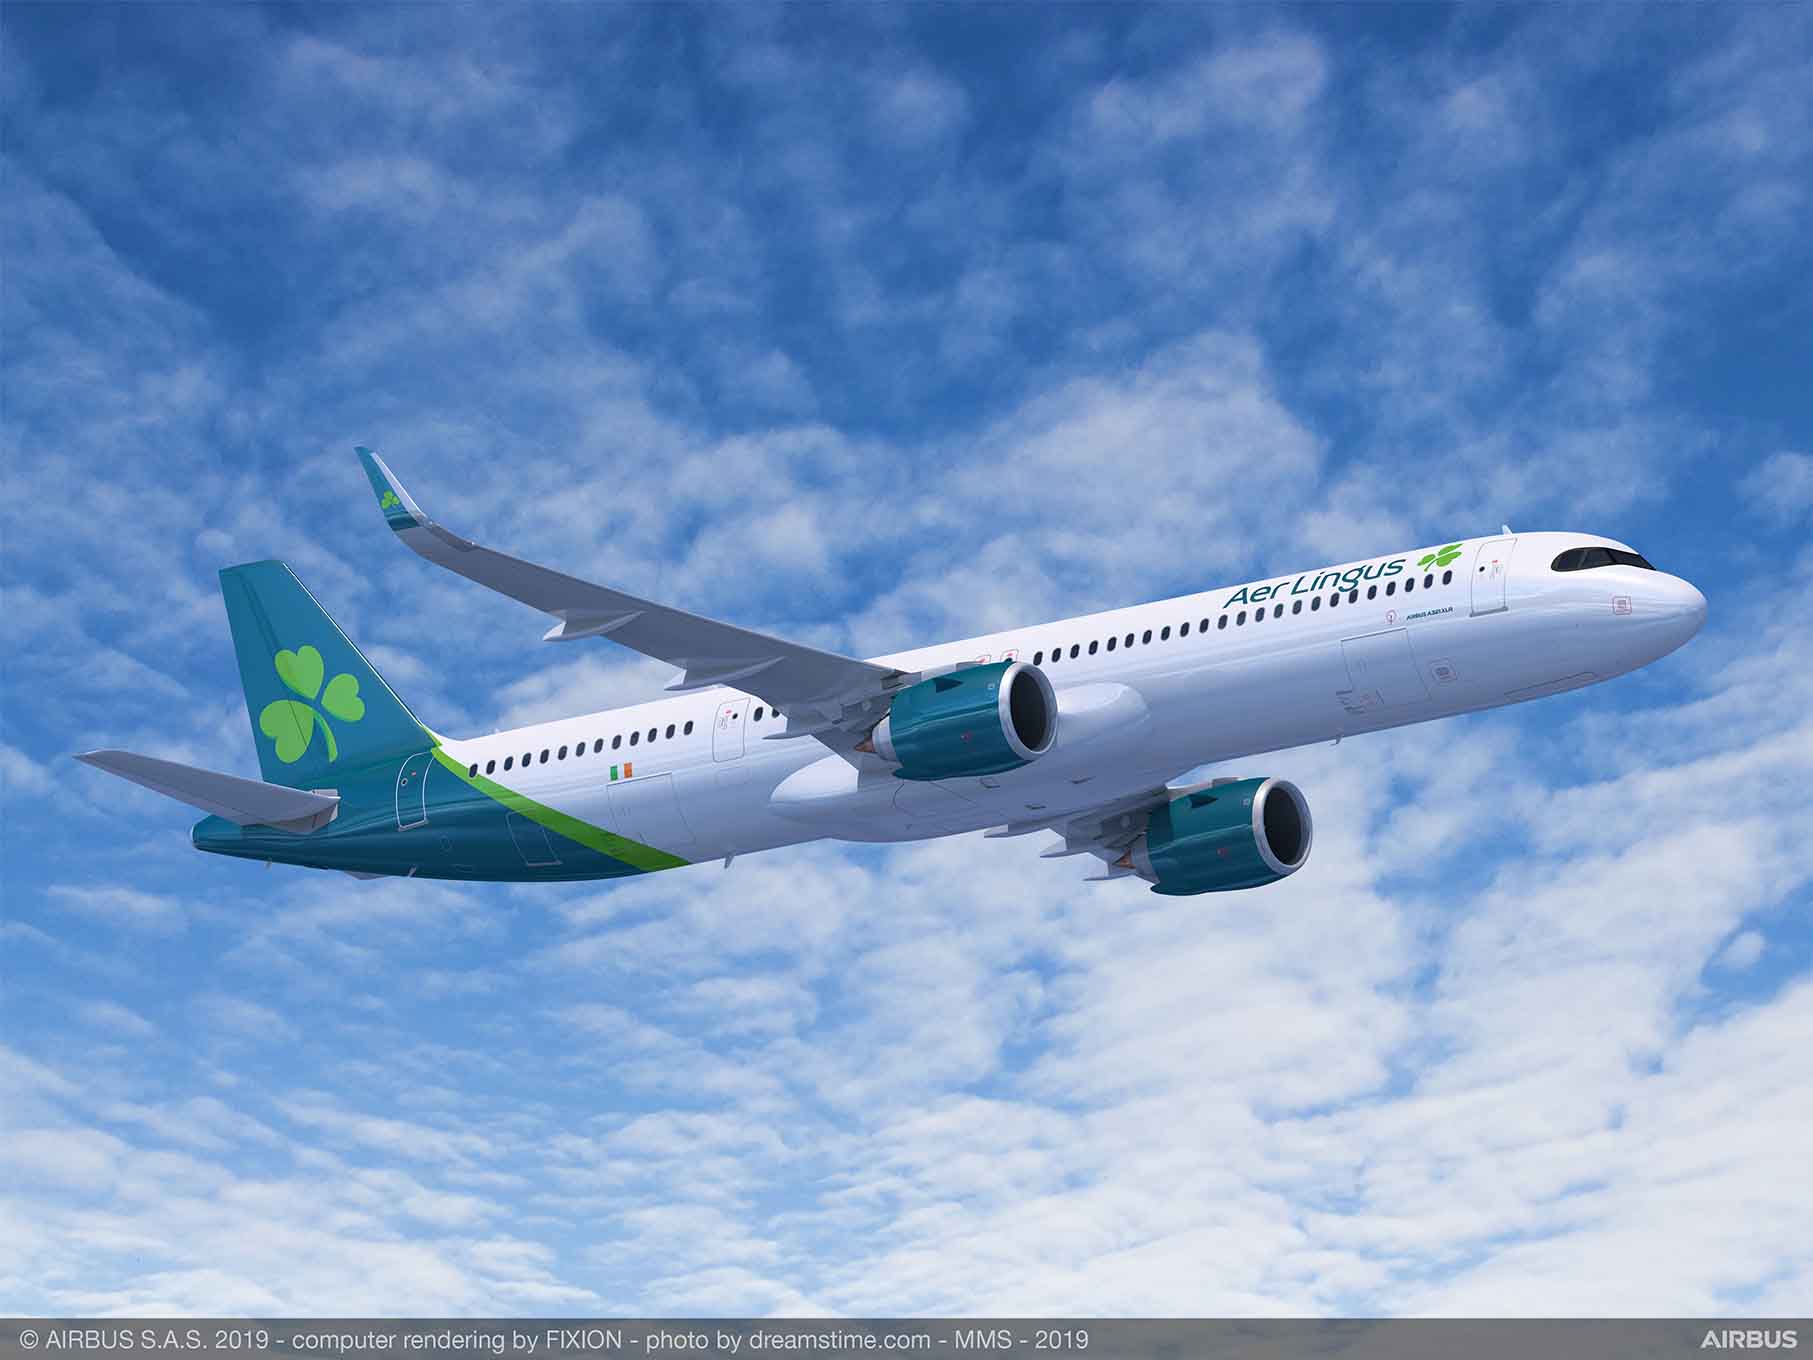 Aer Lingus introduces Airbus A321-200neo to fleet